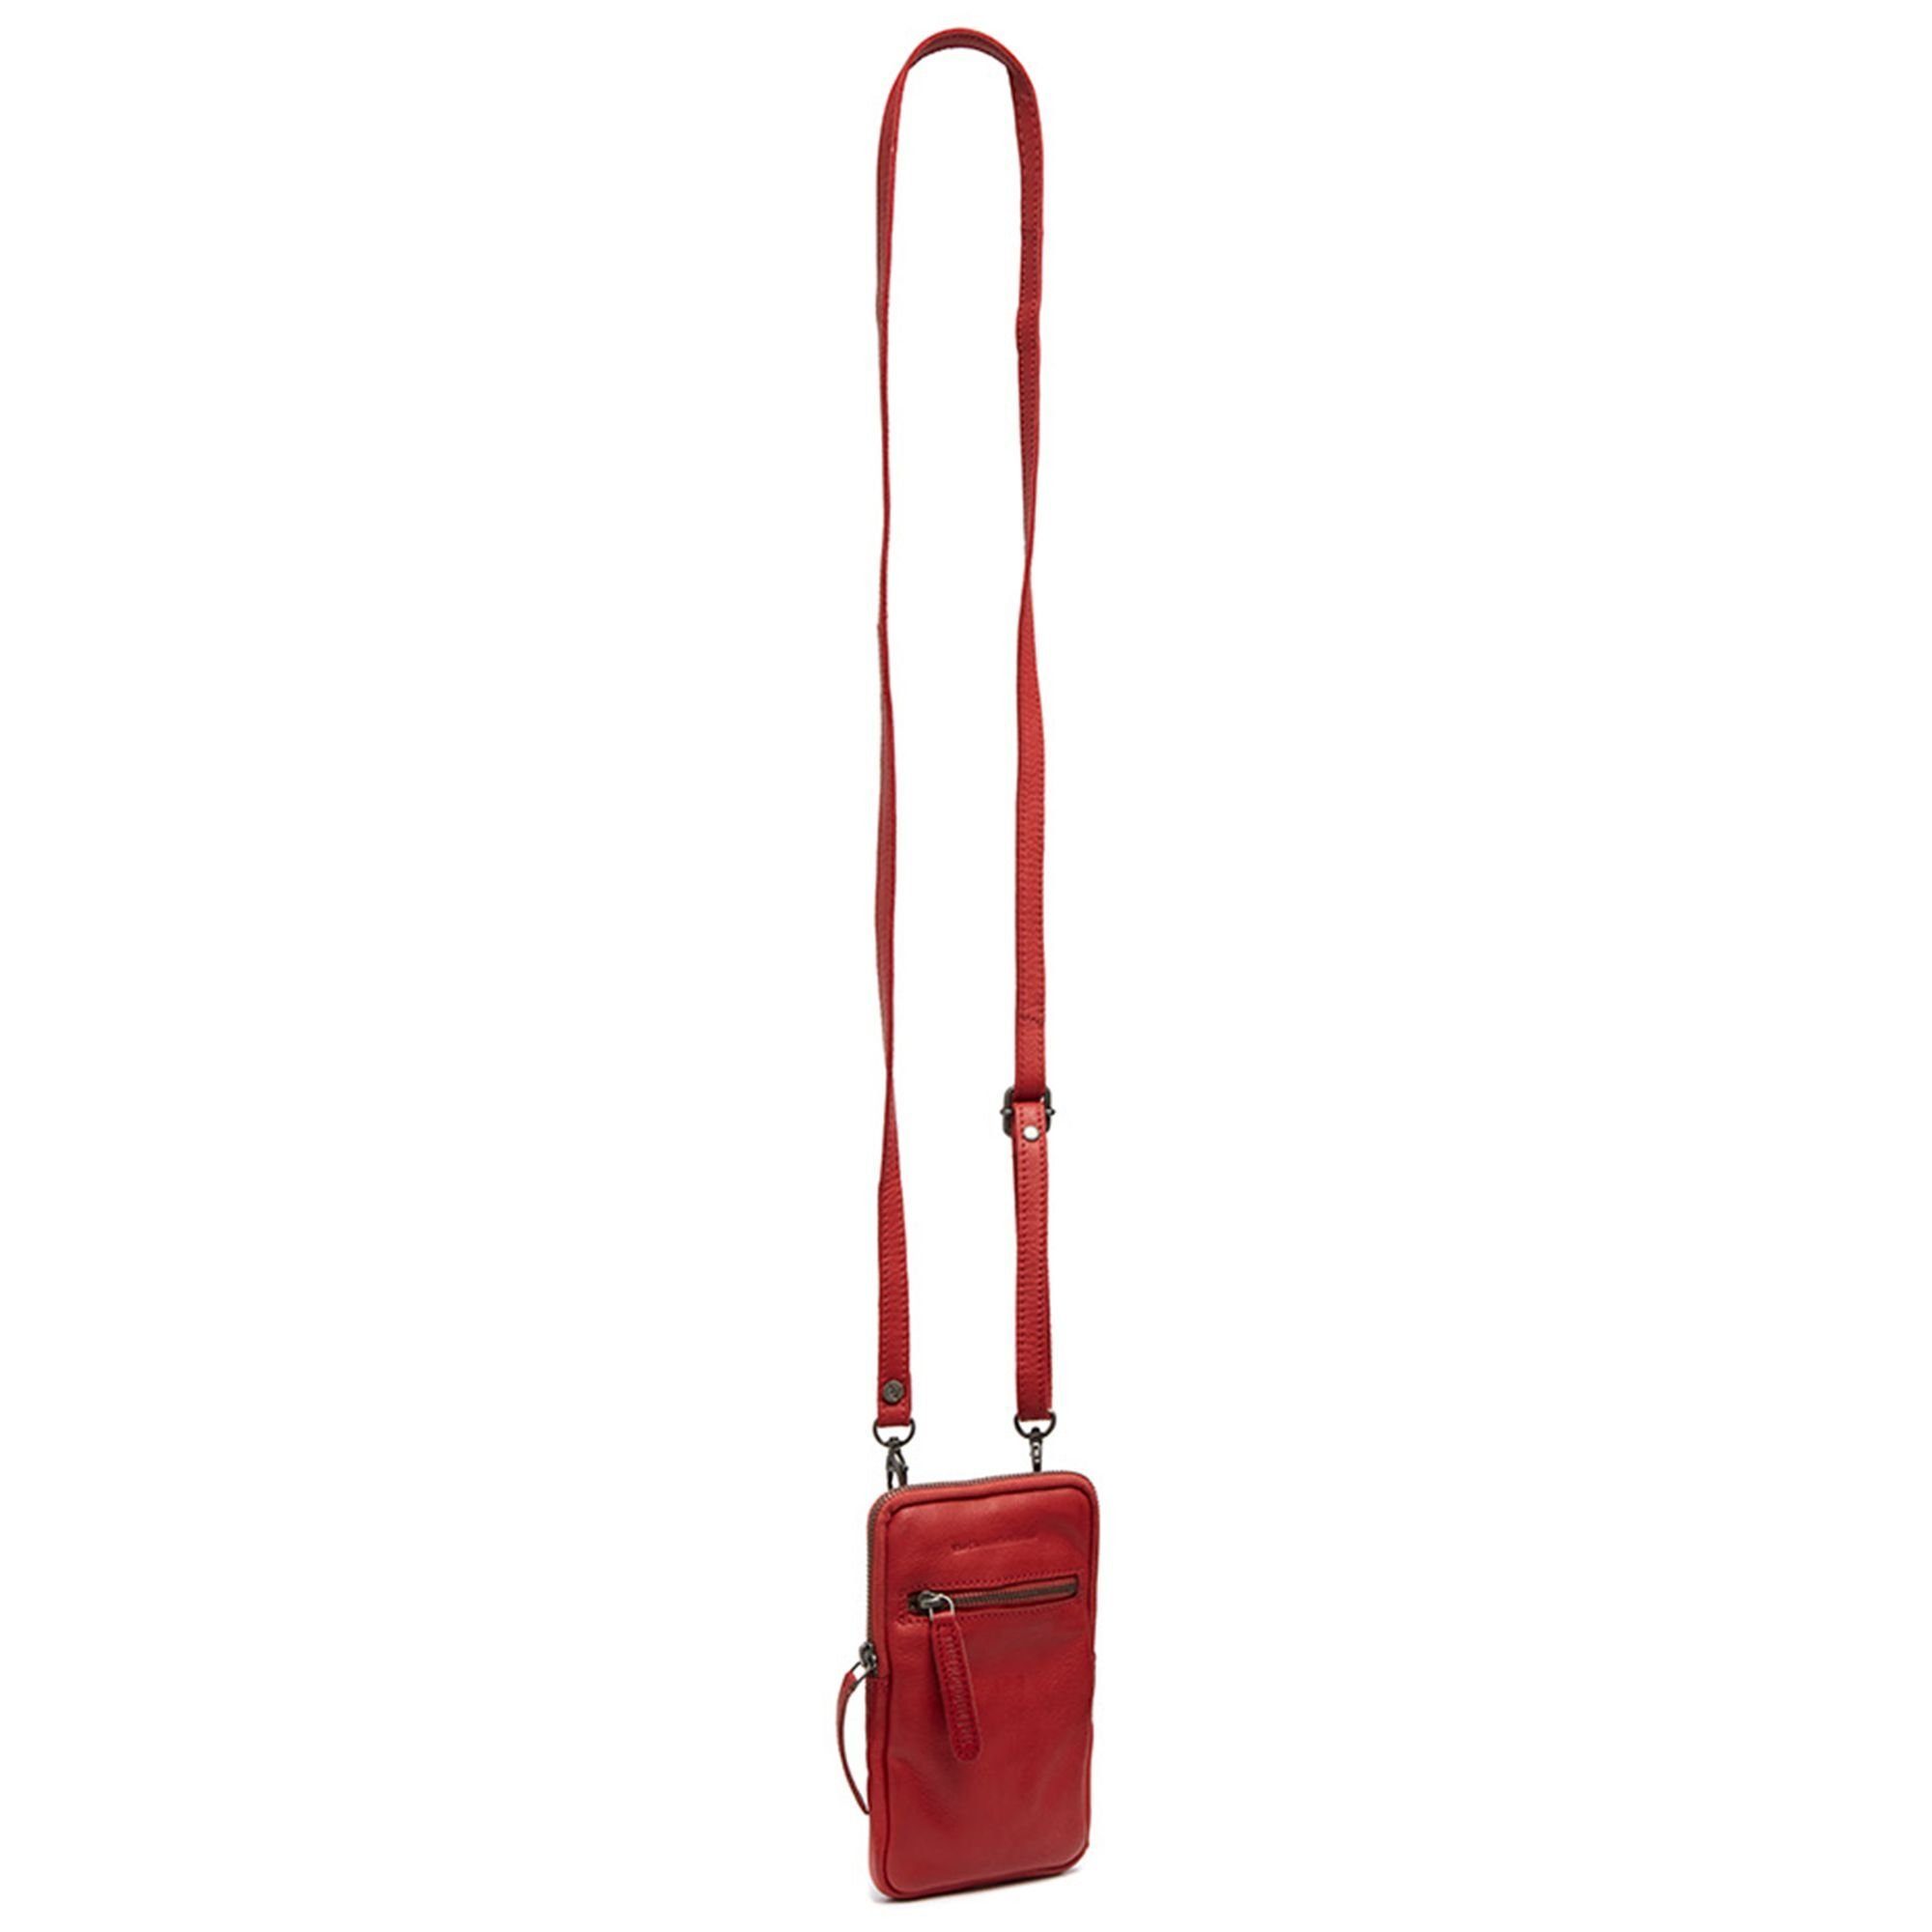 The Chesterfield Brand Leder Smartphone-Hülle, red